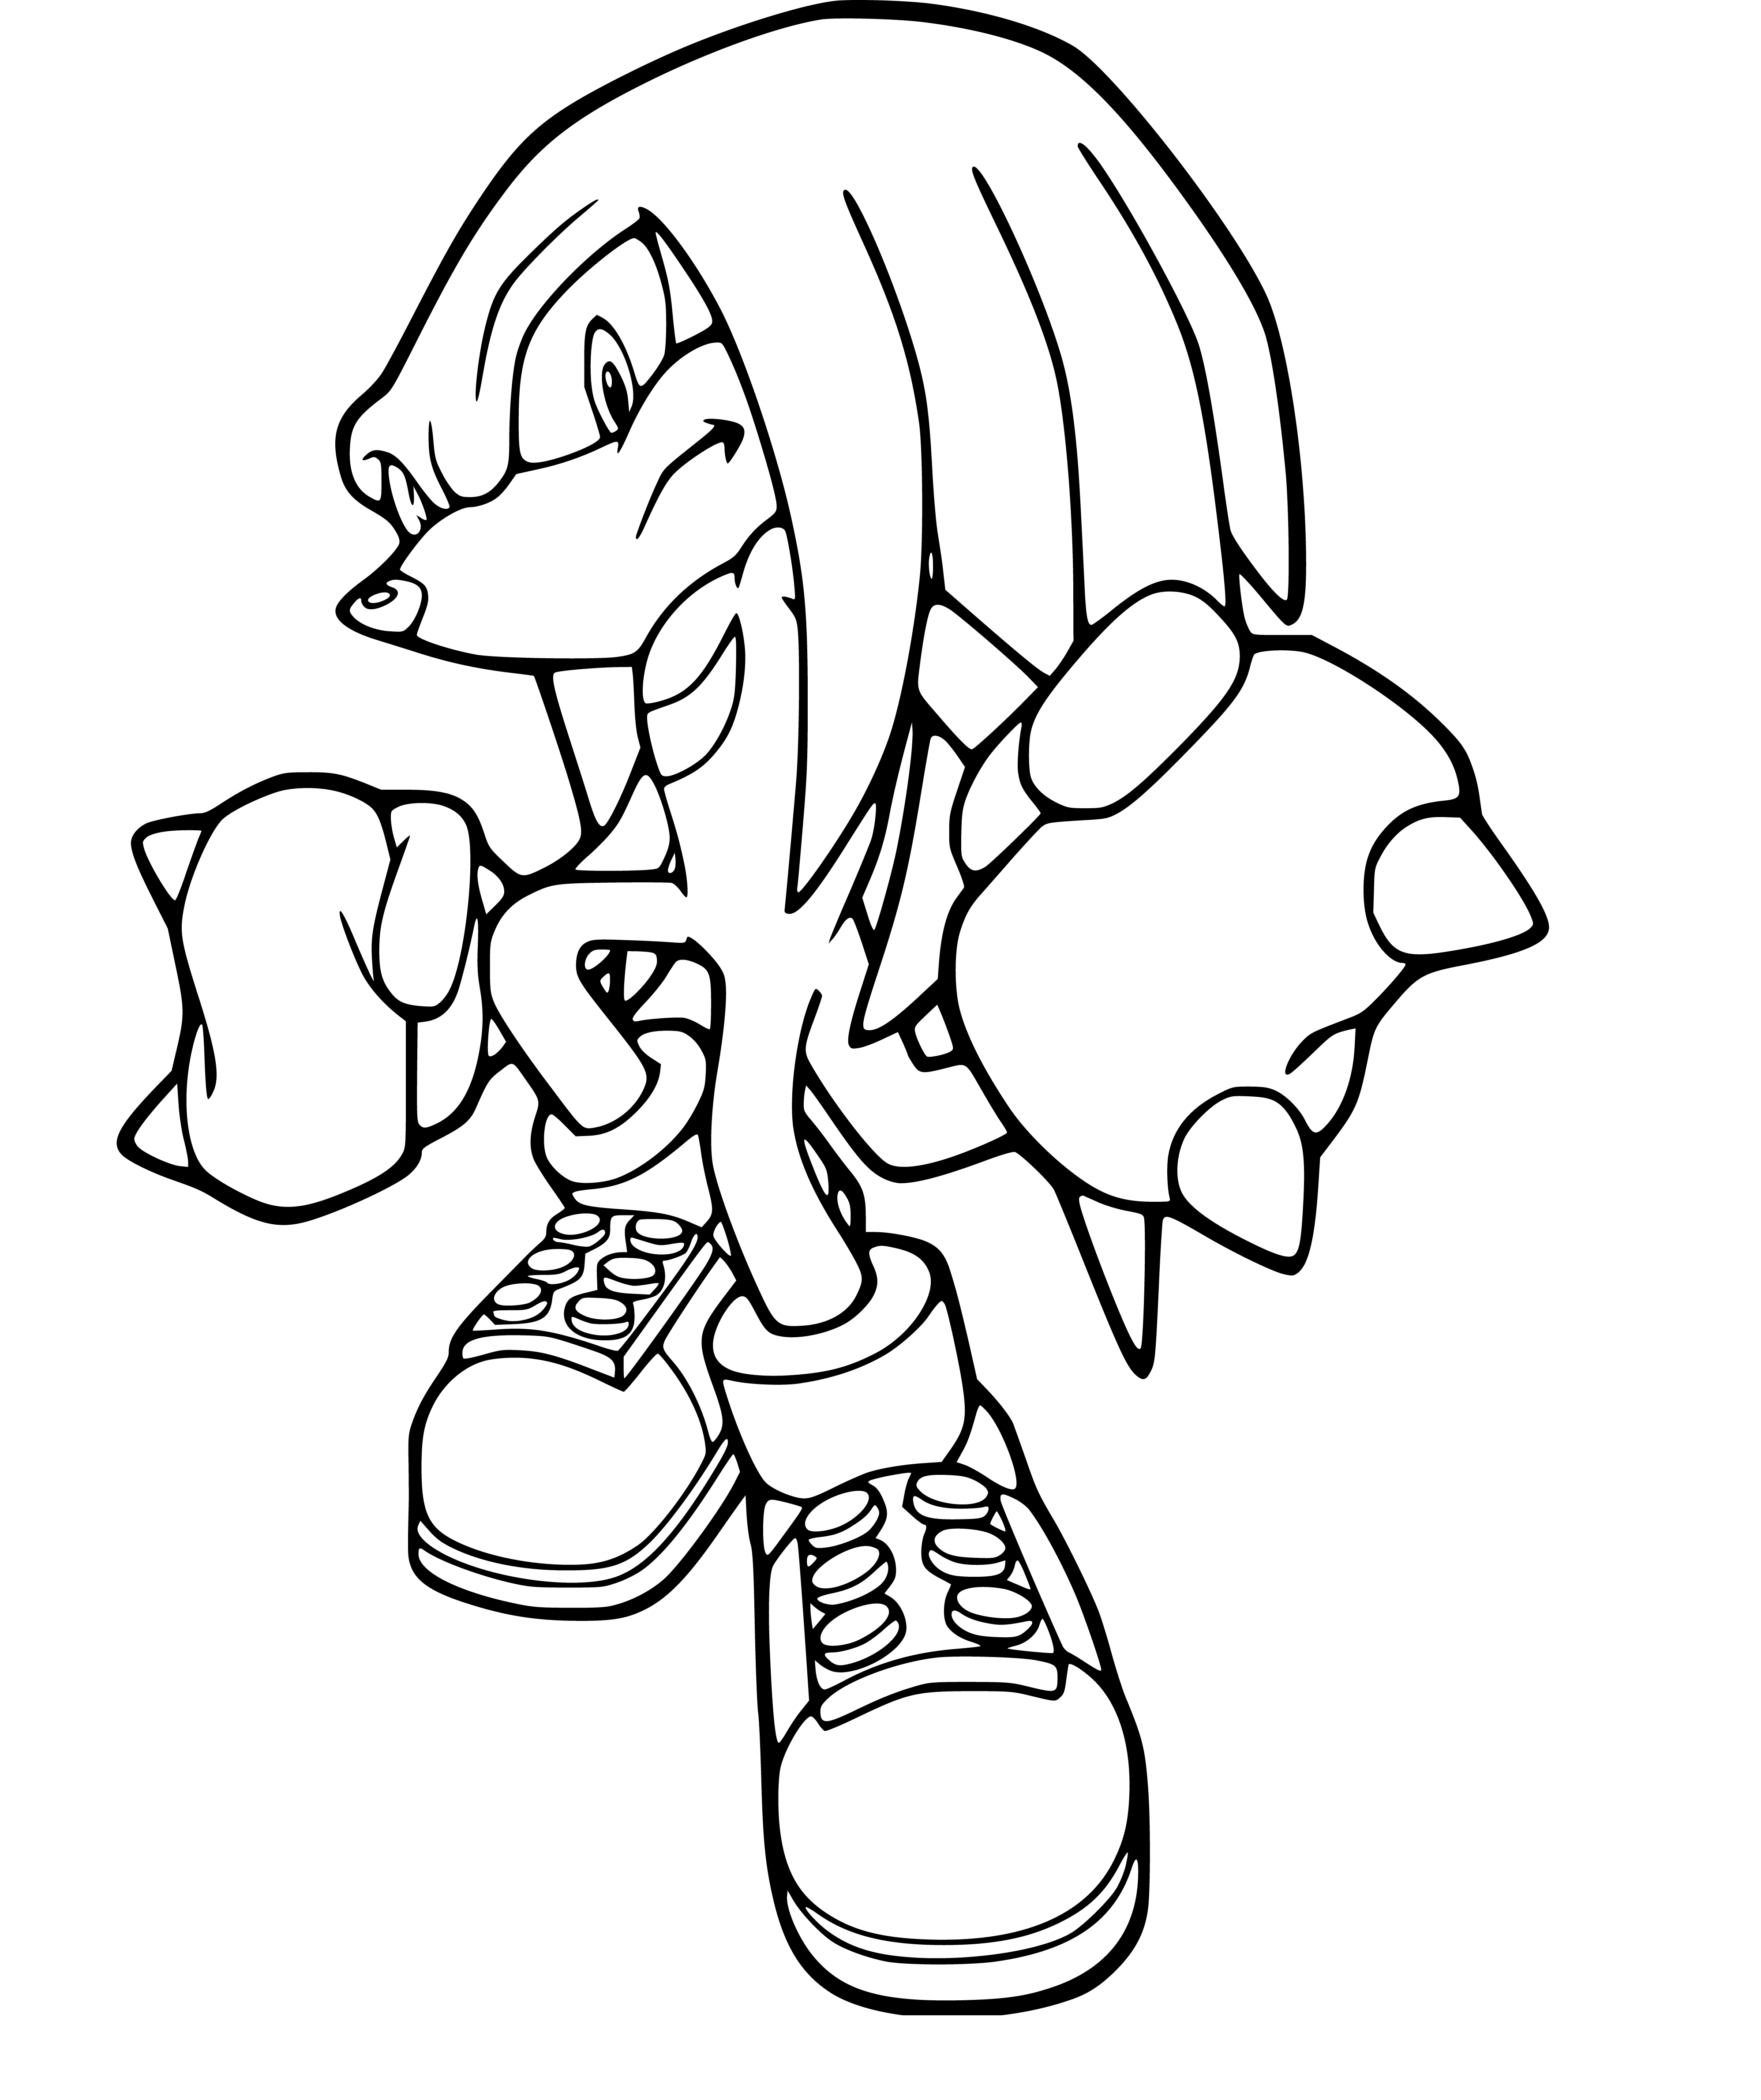 Sonic Knuckles Coloring Page for Kids - SheetalColor.com